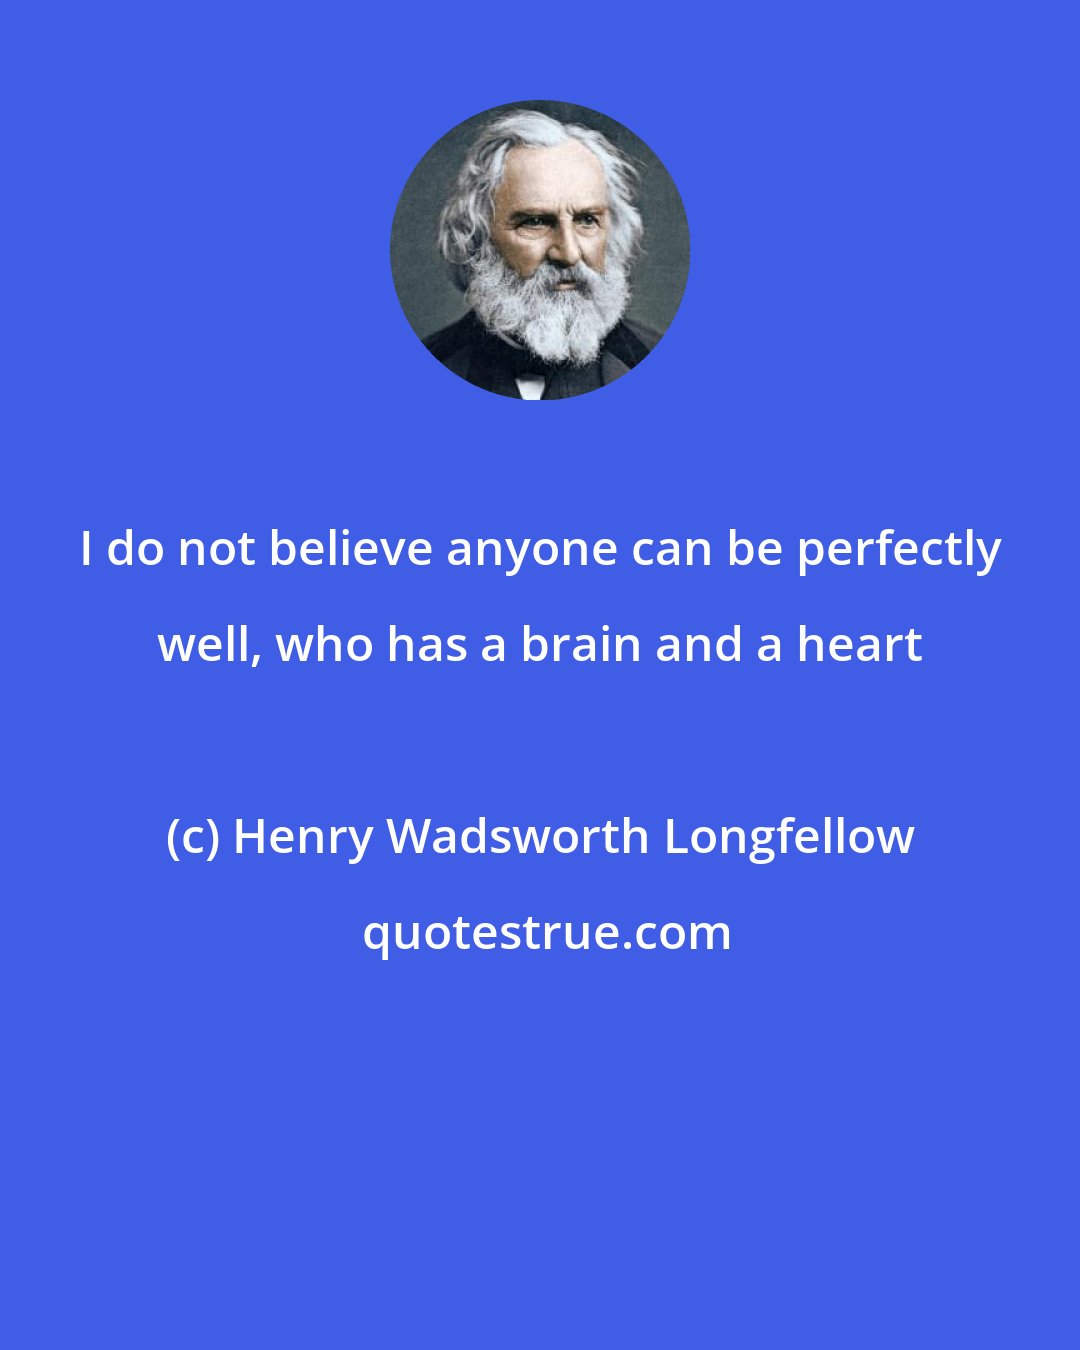 Henry Wadsworth Longfellow: I do not believe anyone can be perfectly well, who has a brain and a heart